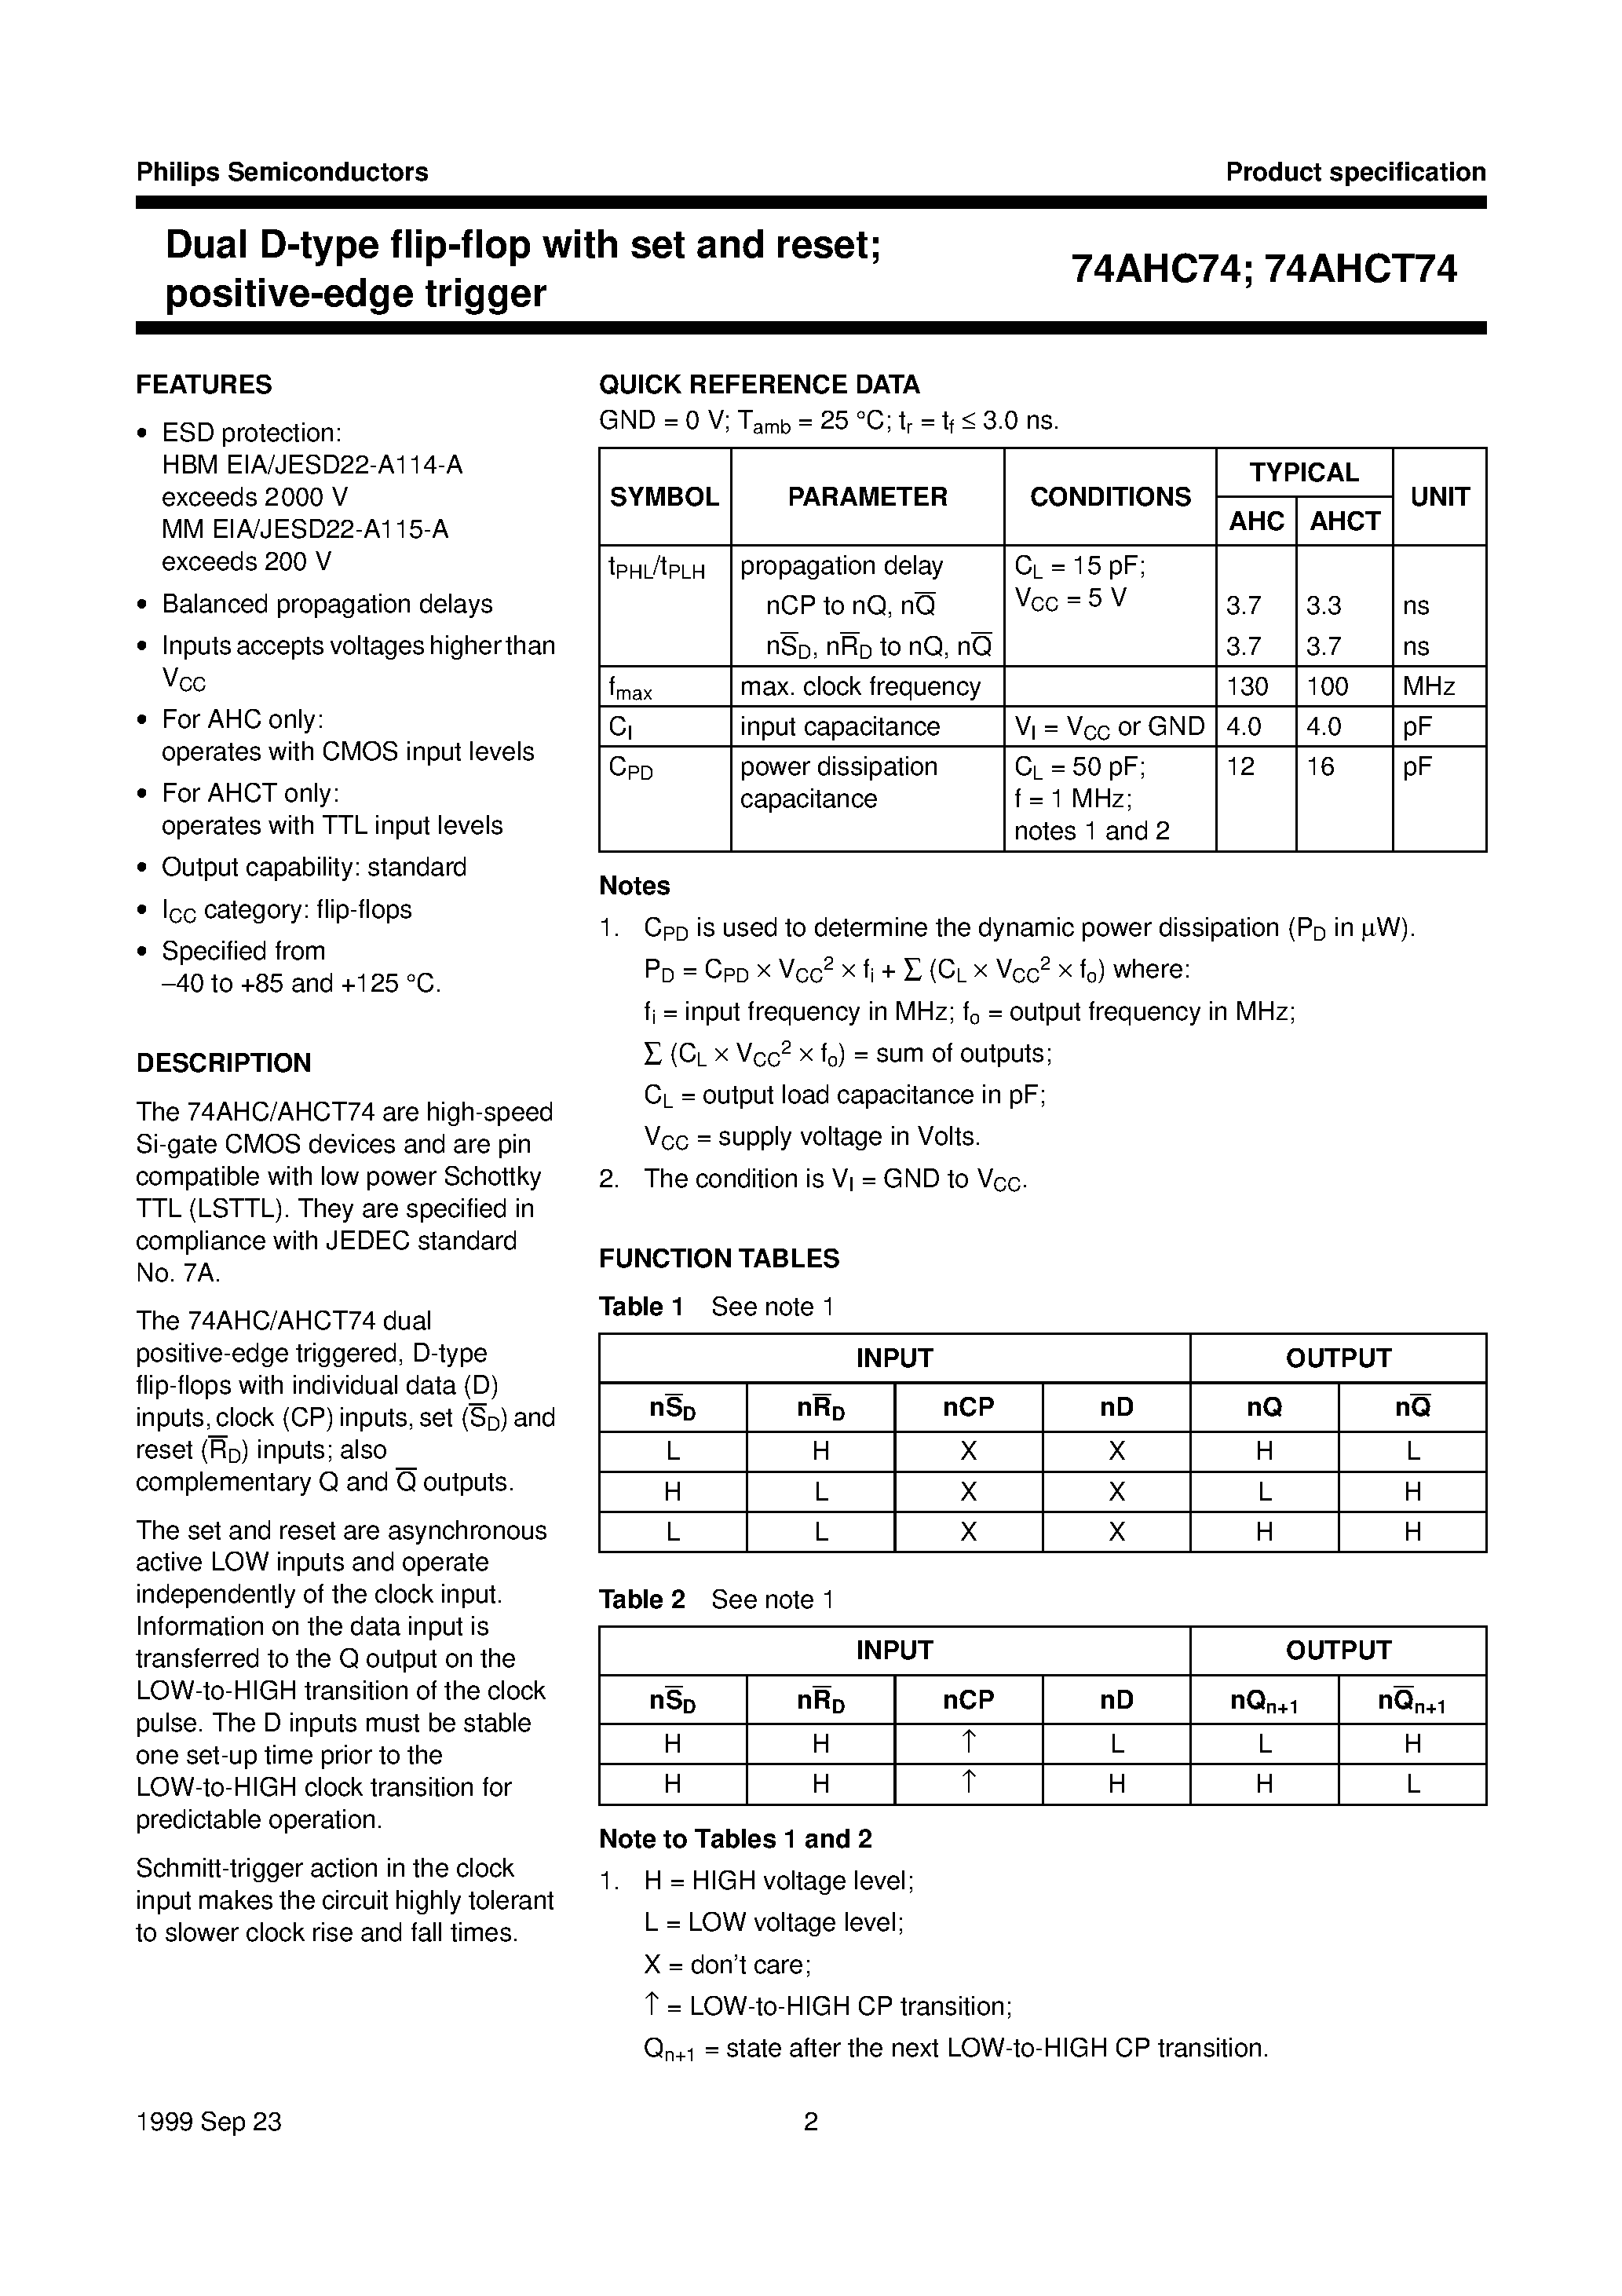 Datasheet 74AHCT74D - Dual D-type flip-flop with set and reset; positive-edge trigger page 2